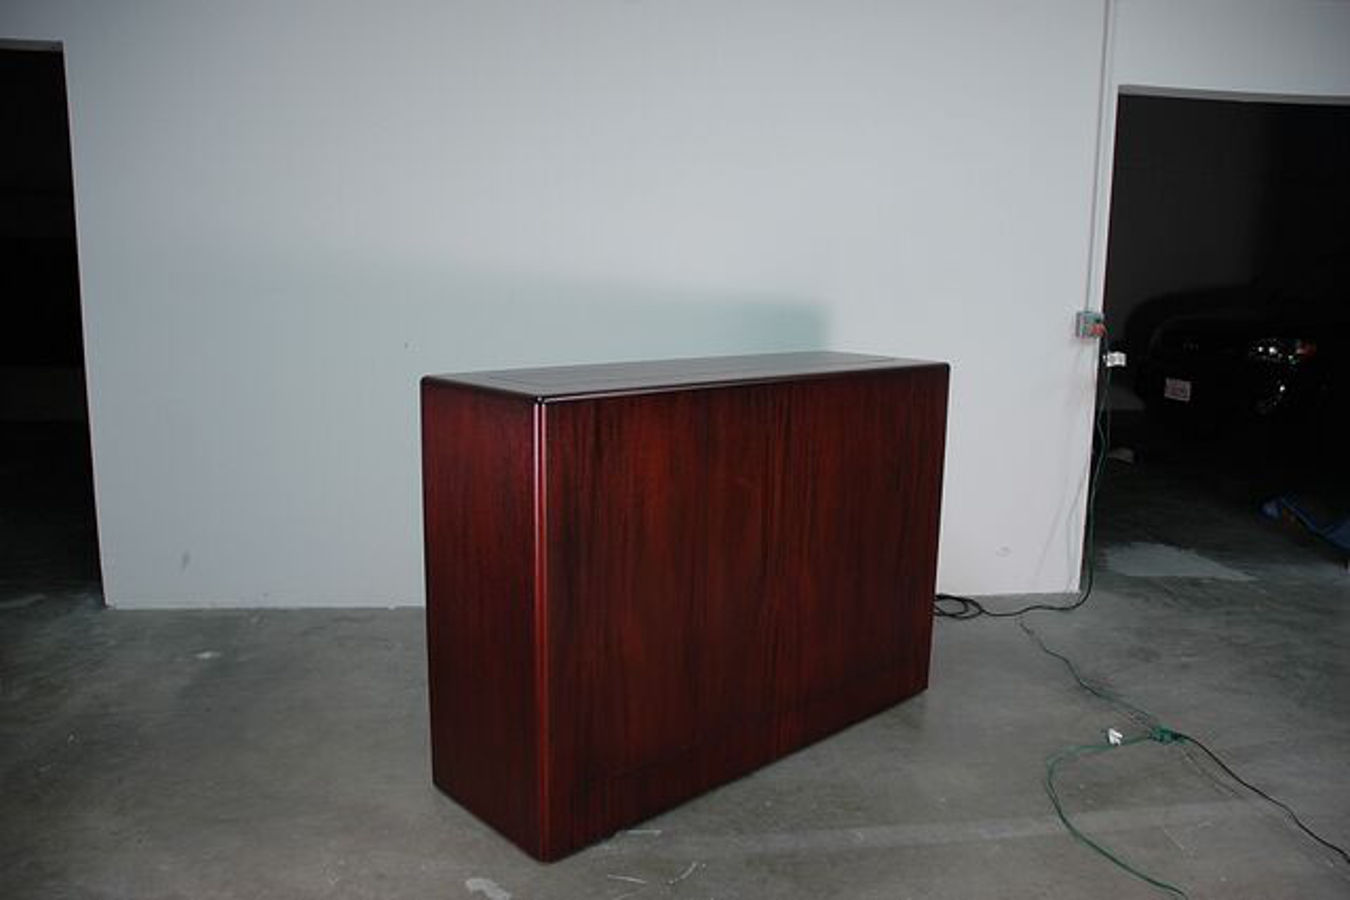 La Costa with retractable TV lift kit inside is made out of mahogany wood